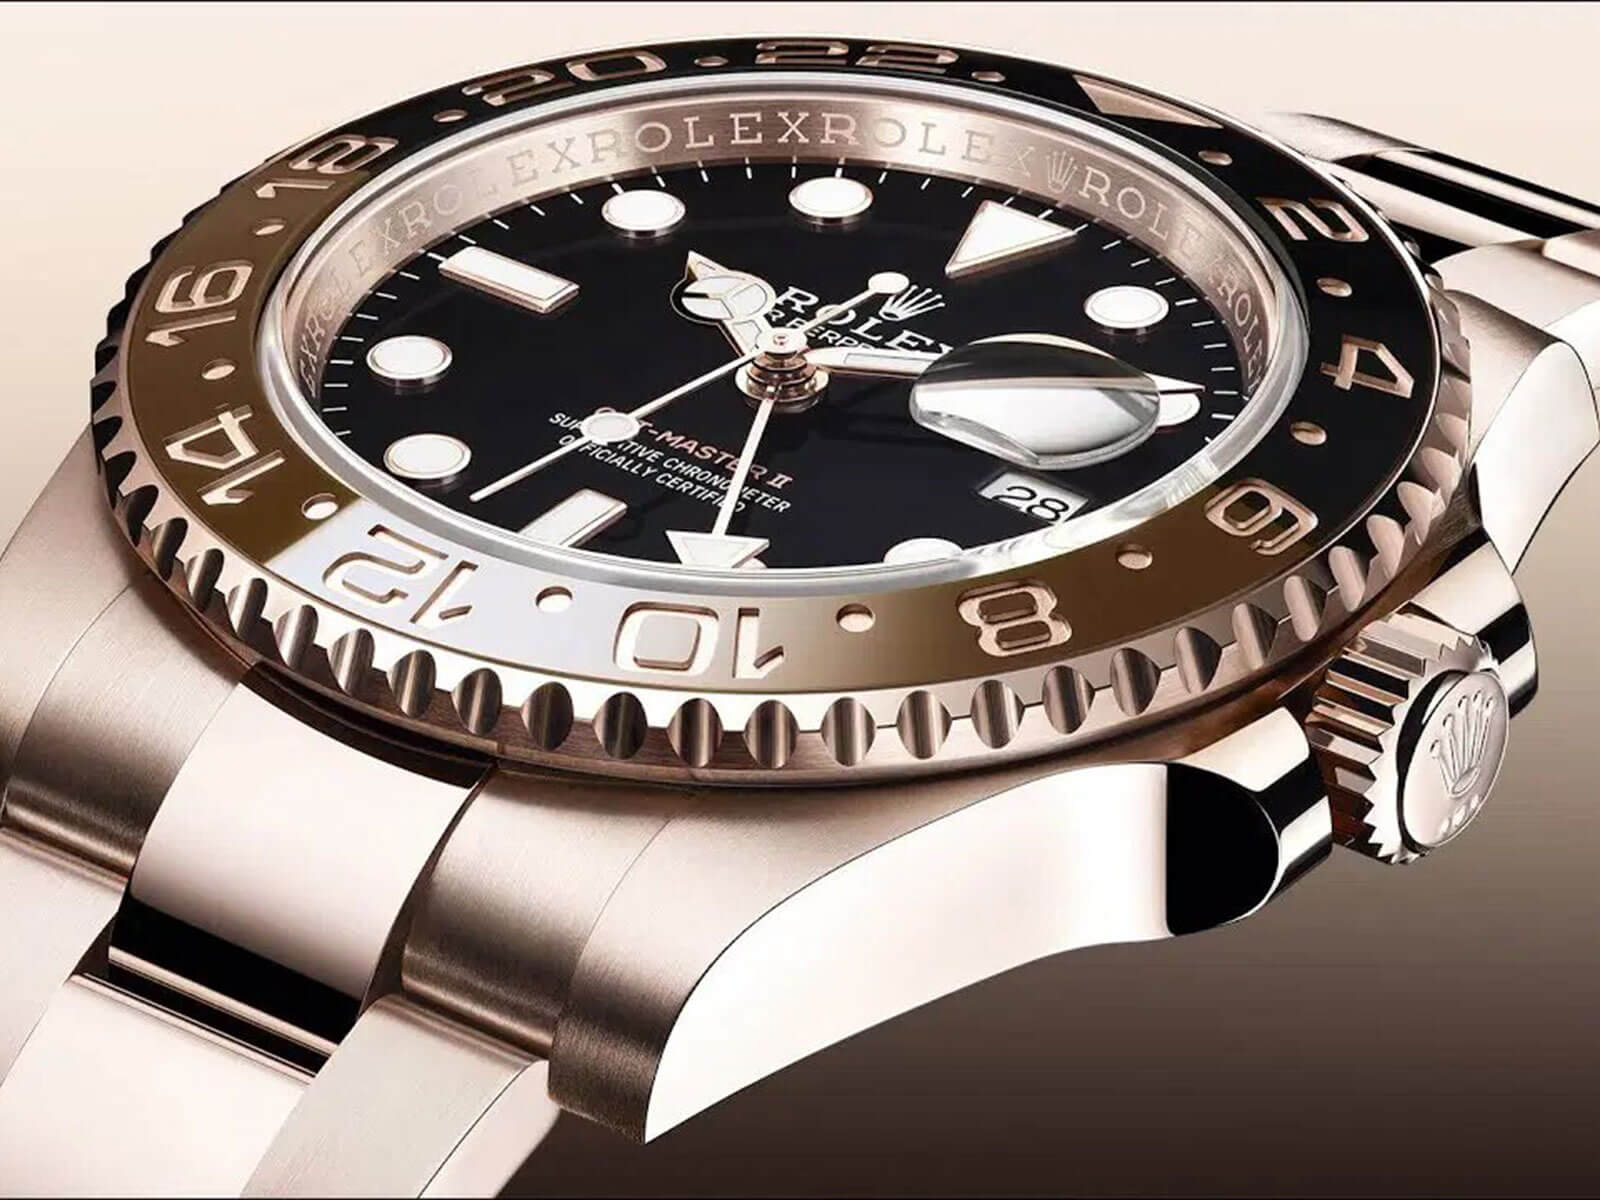 Rolex GMT-Master II 126715CHNR is the first Rolex model with the Brown-Black Cerachrom Bezel